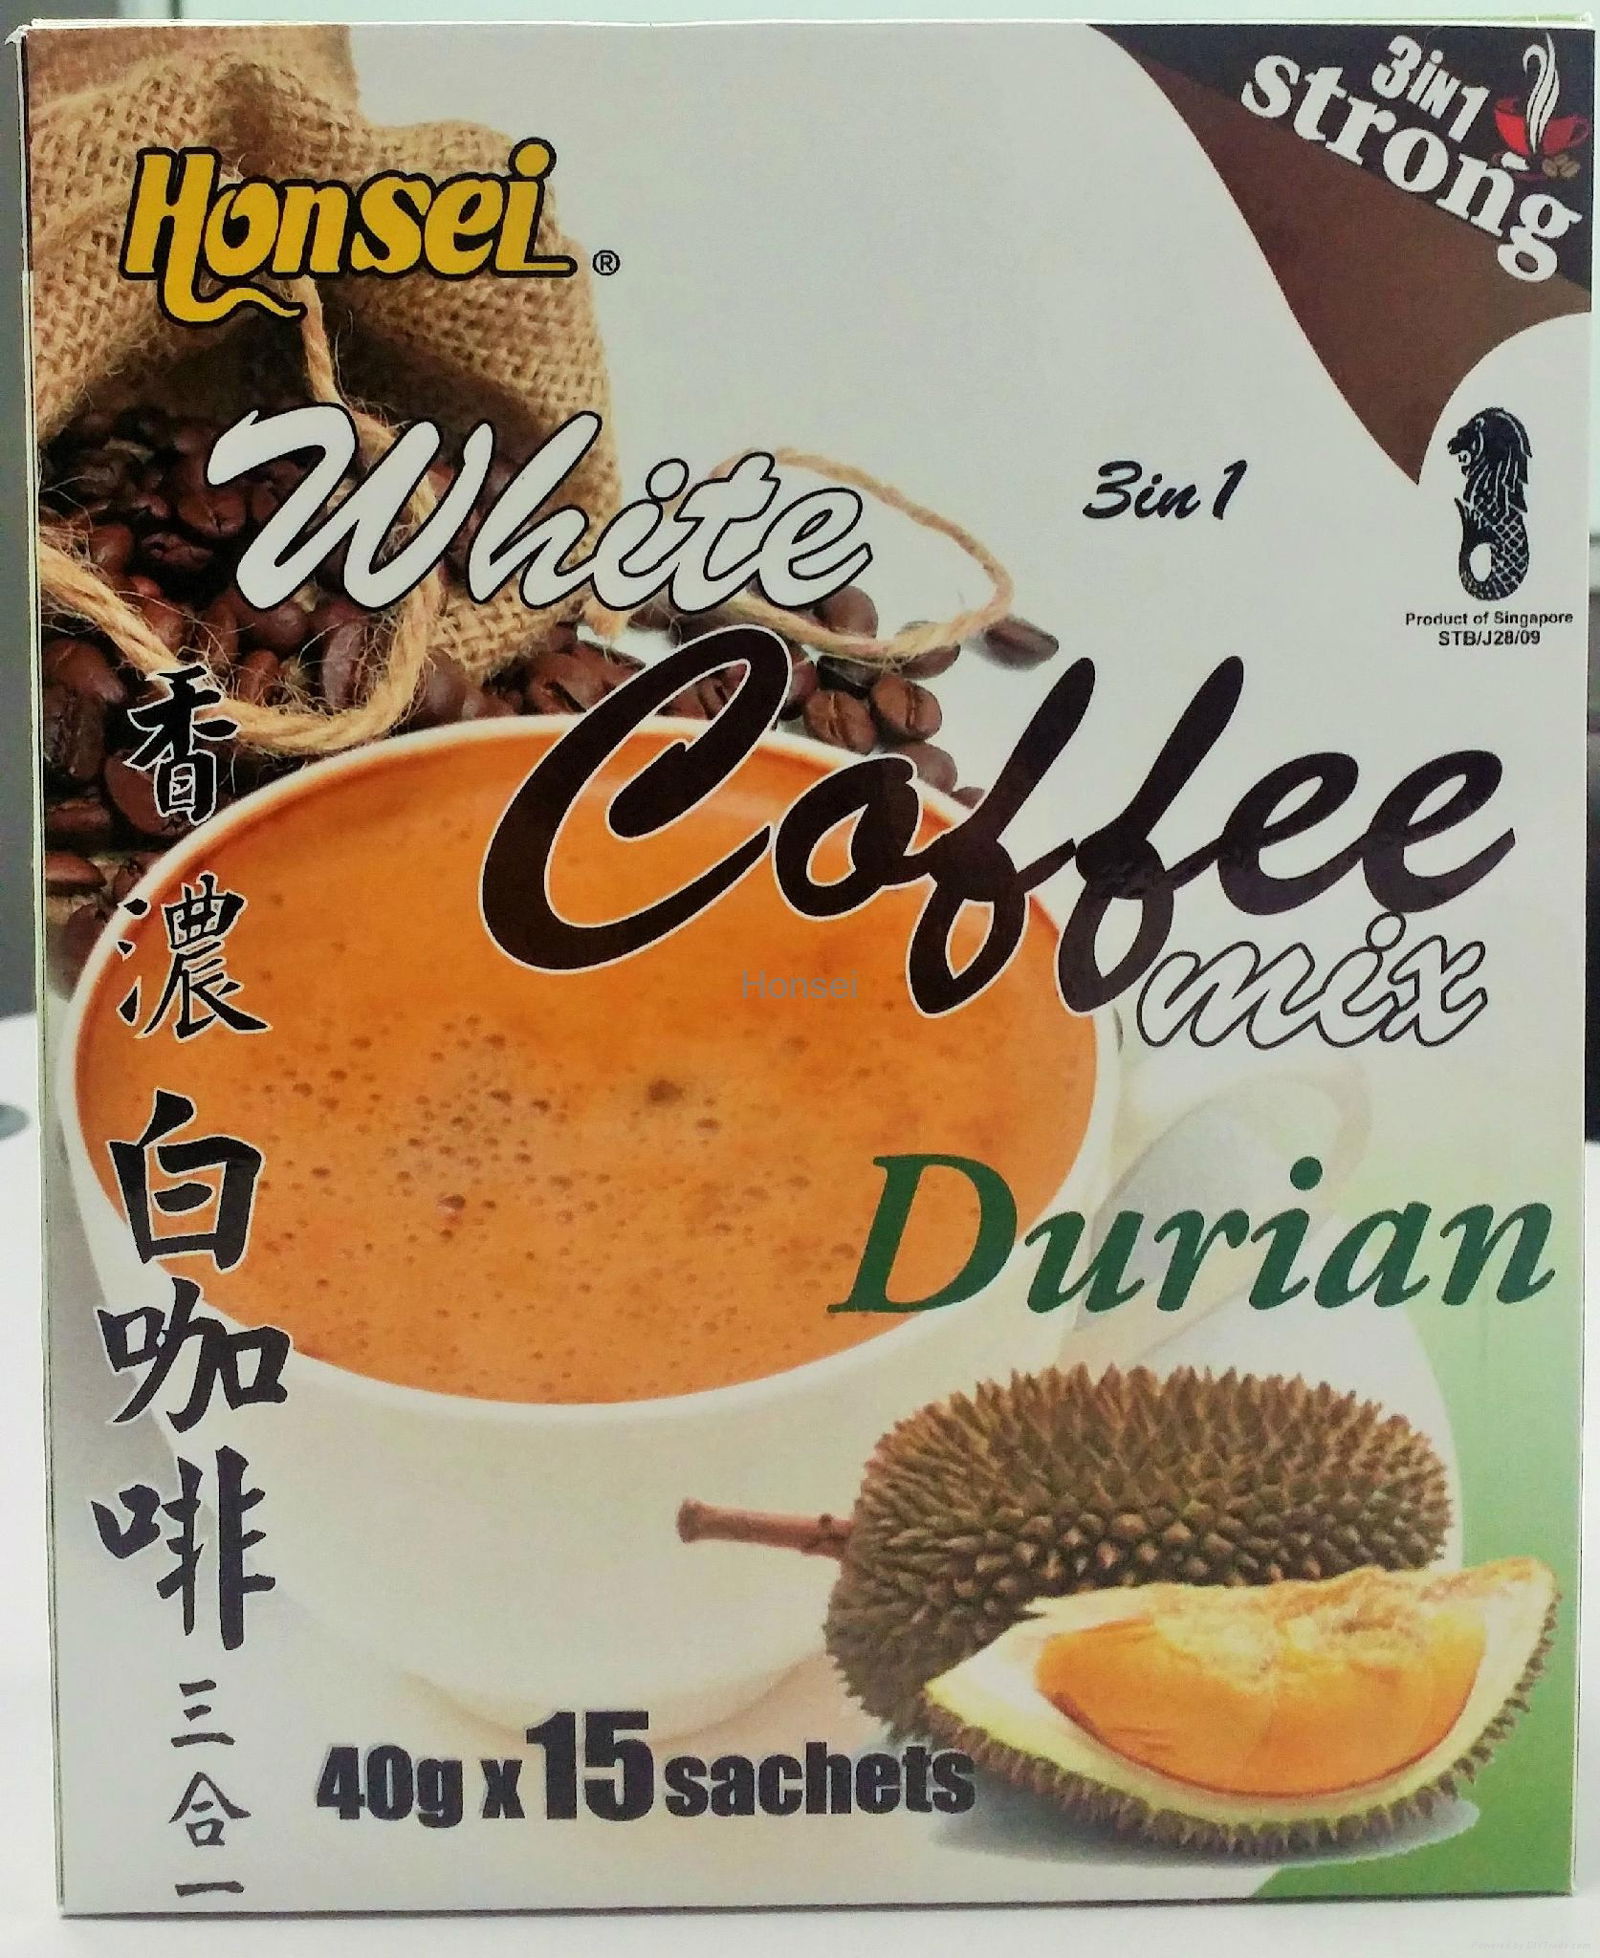 Durian White Coffee Strong 5